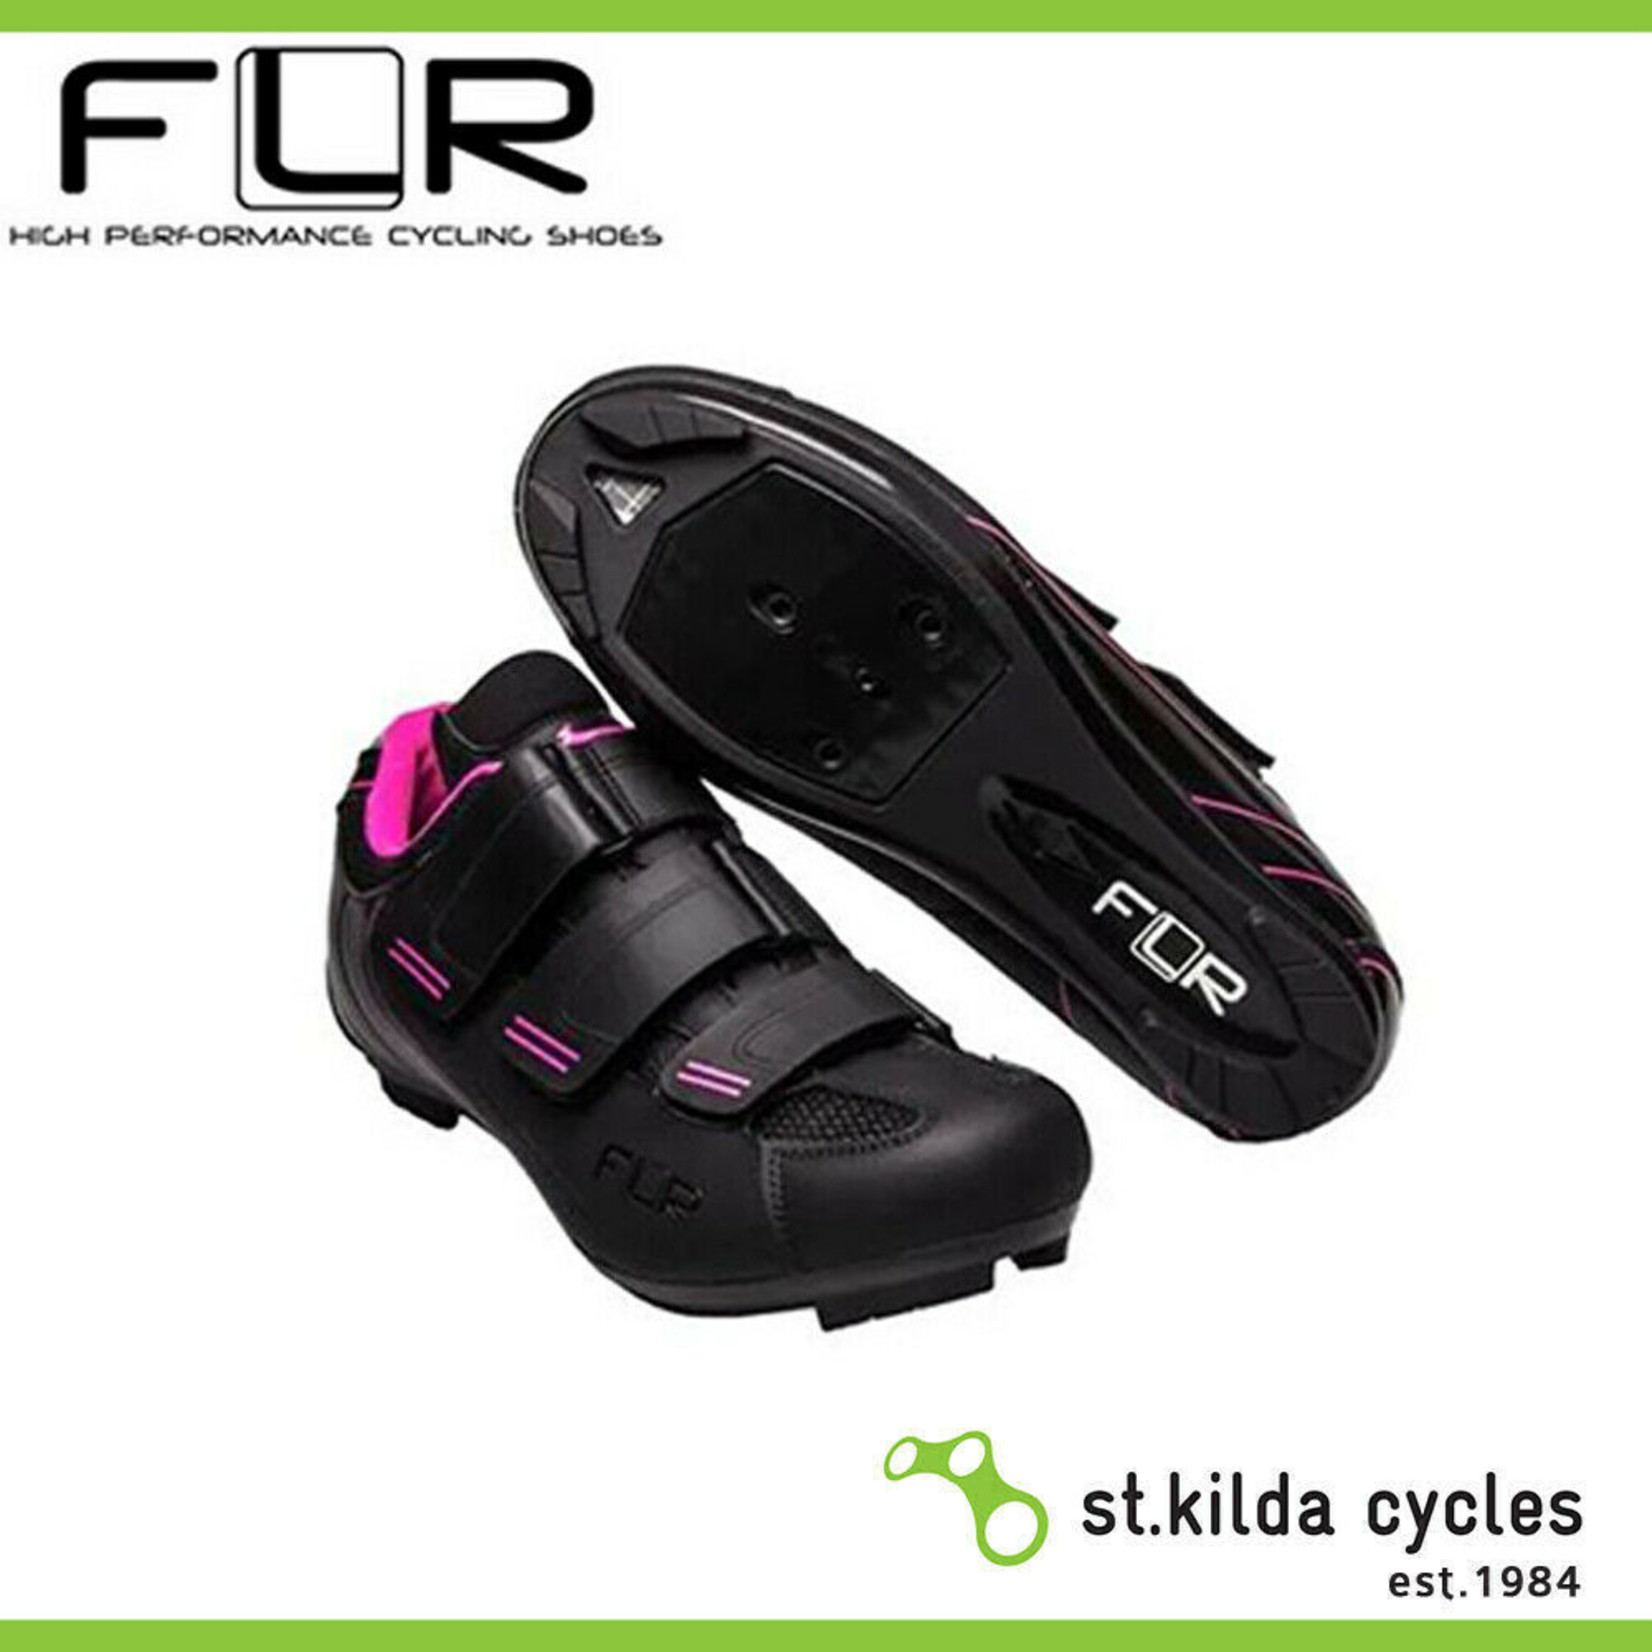 FLR FLR F-35-III Pro Road Shoes - R250 Outsole - Laces - Size 38 - Black - Pink